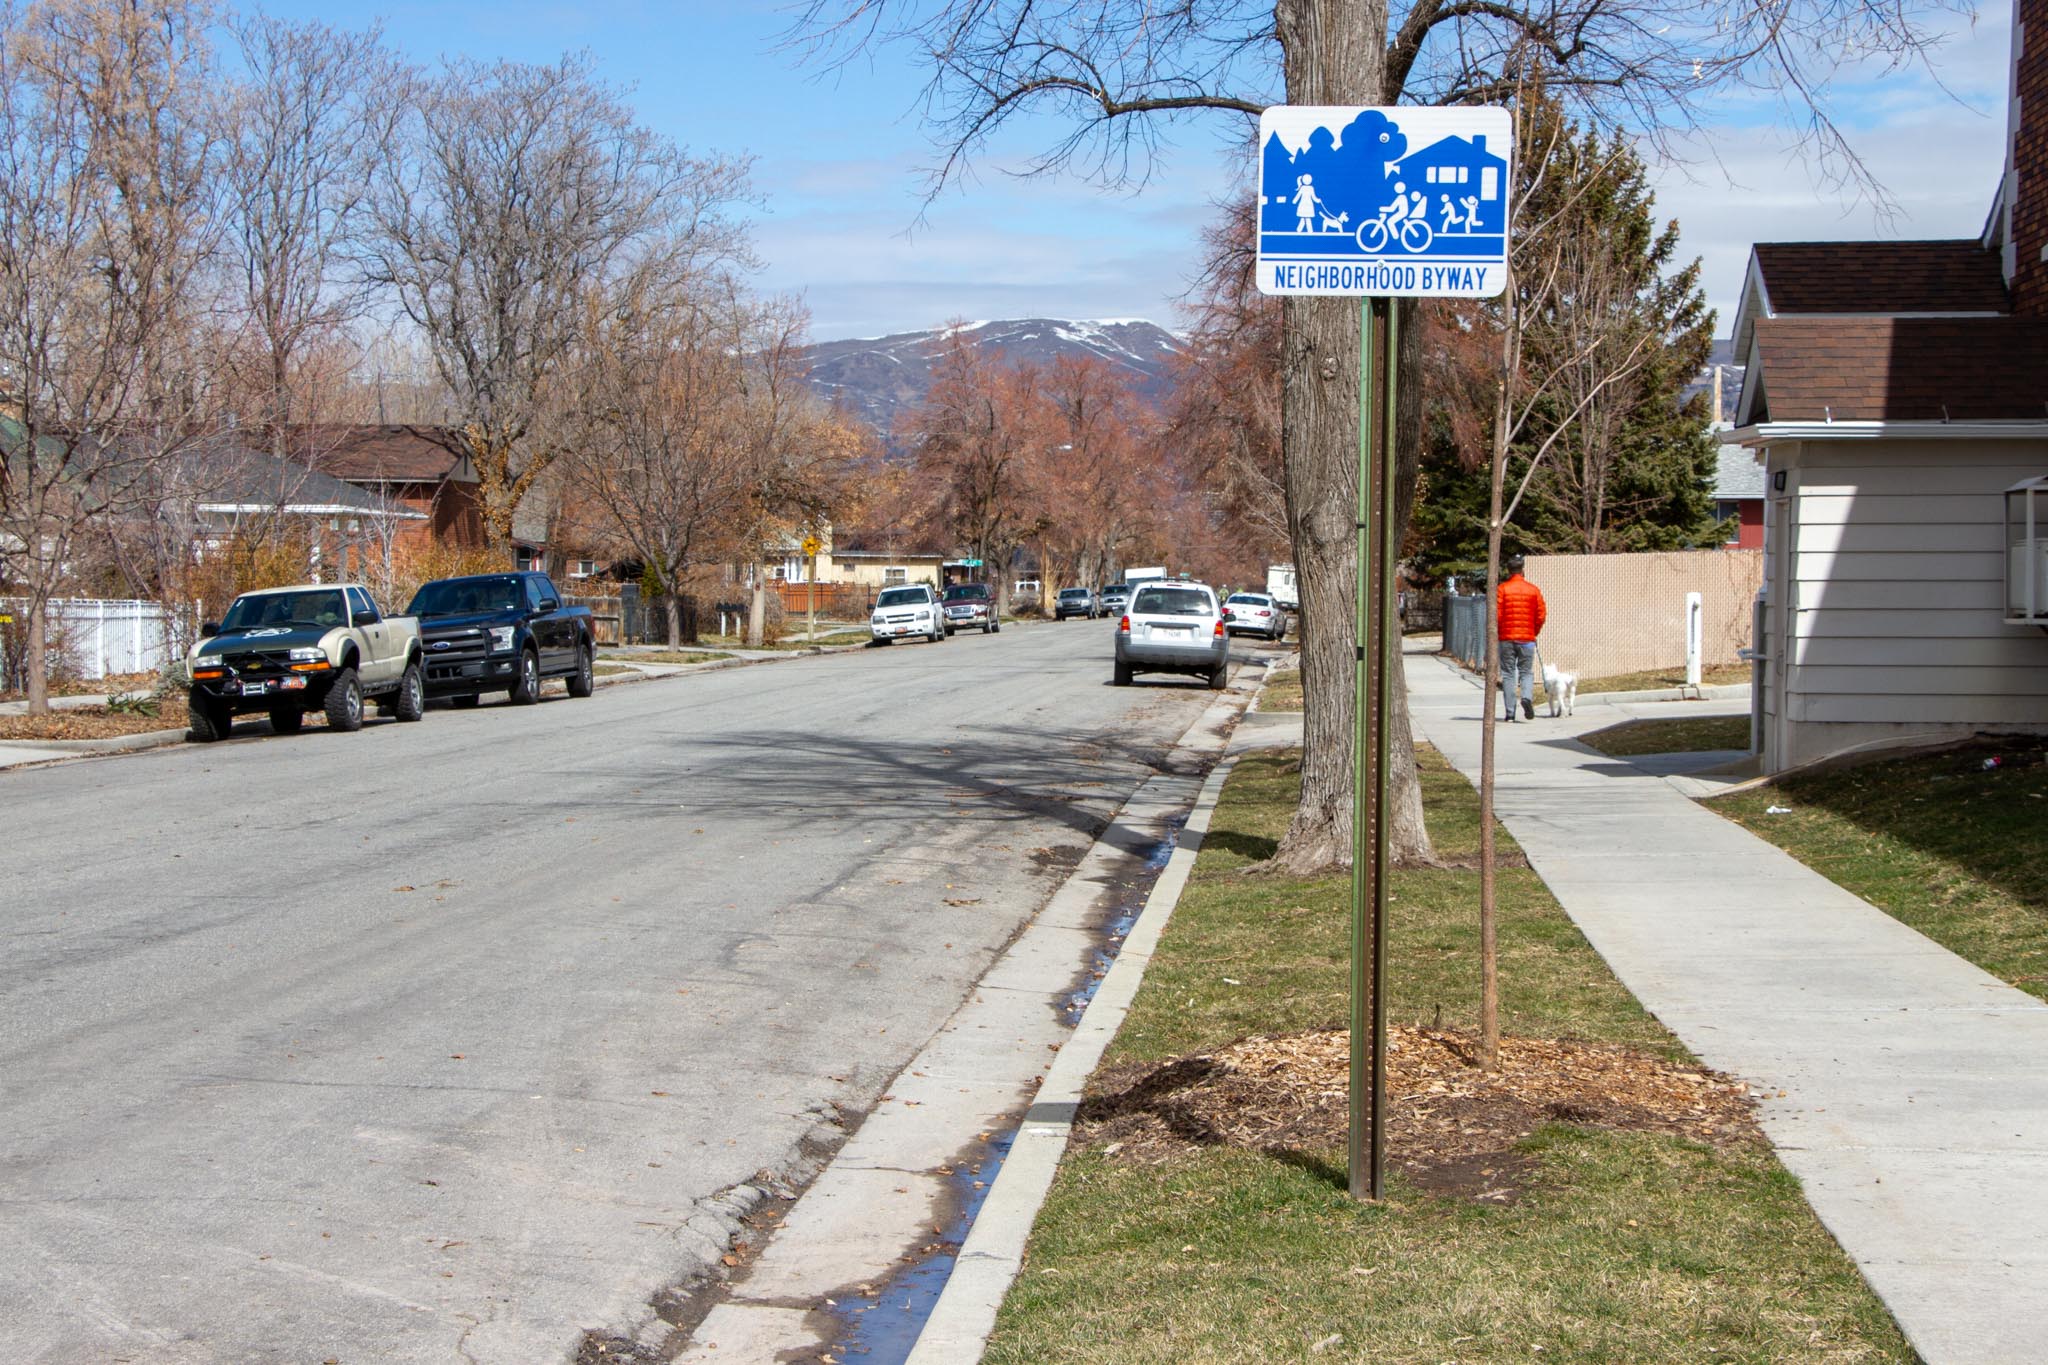 What Makes A Street Into A Neighborhood?